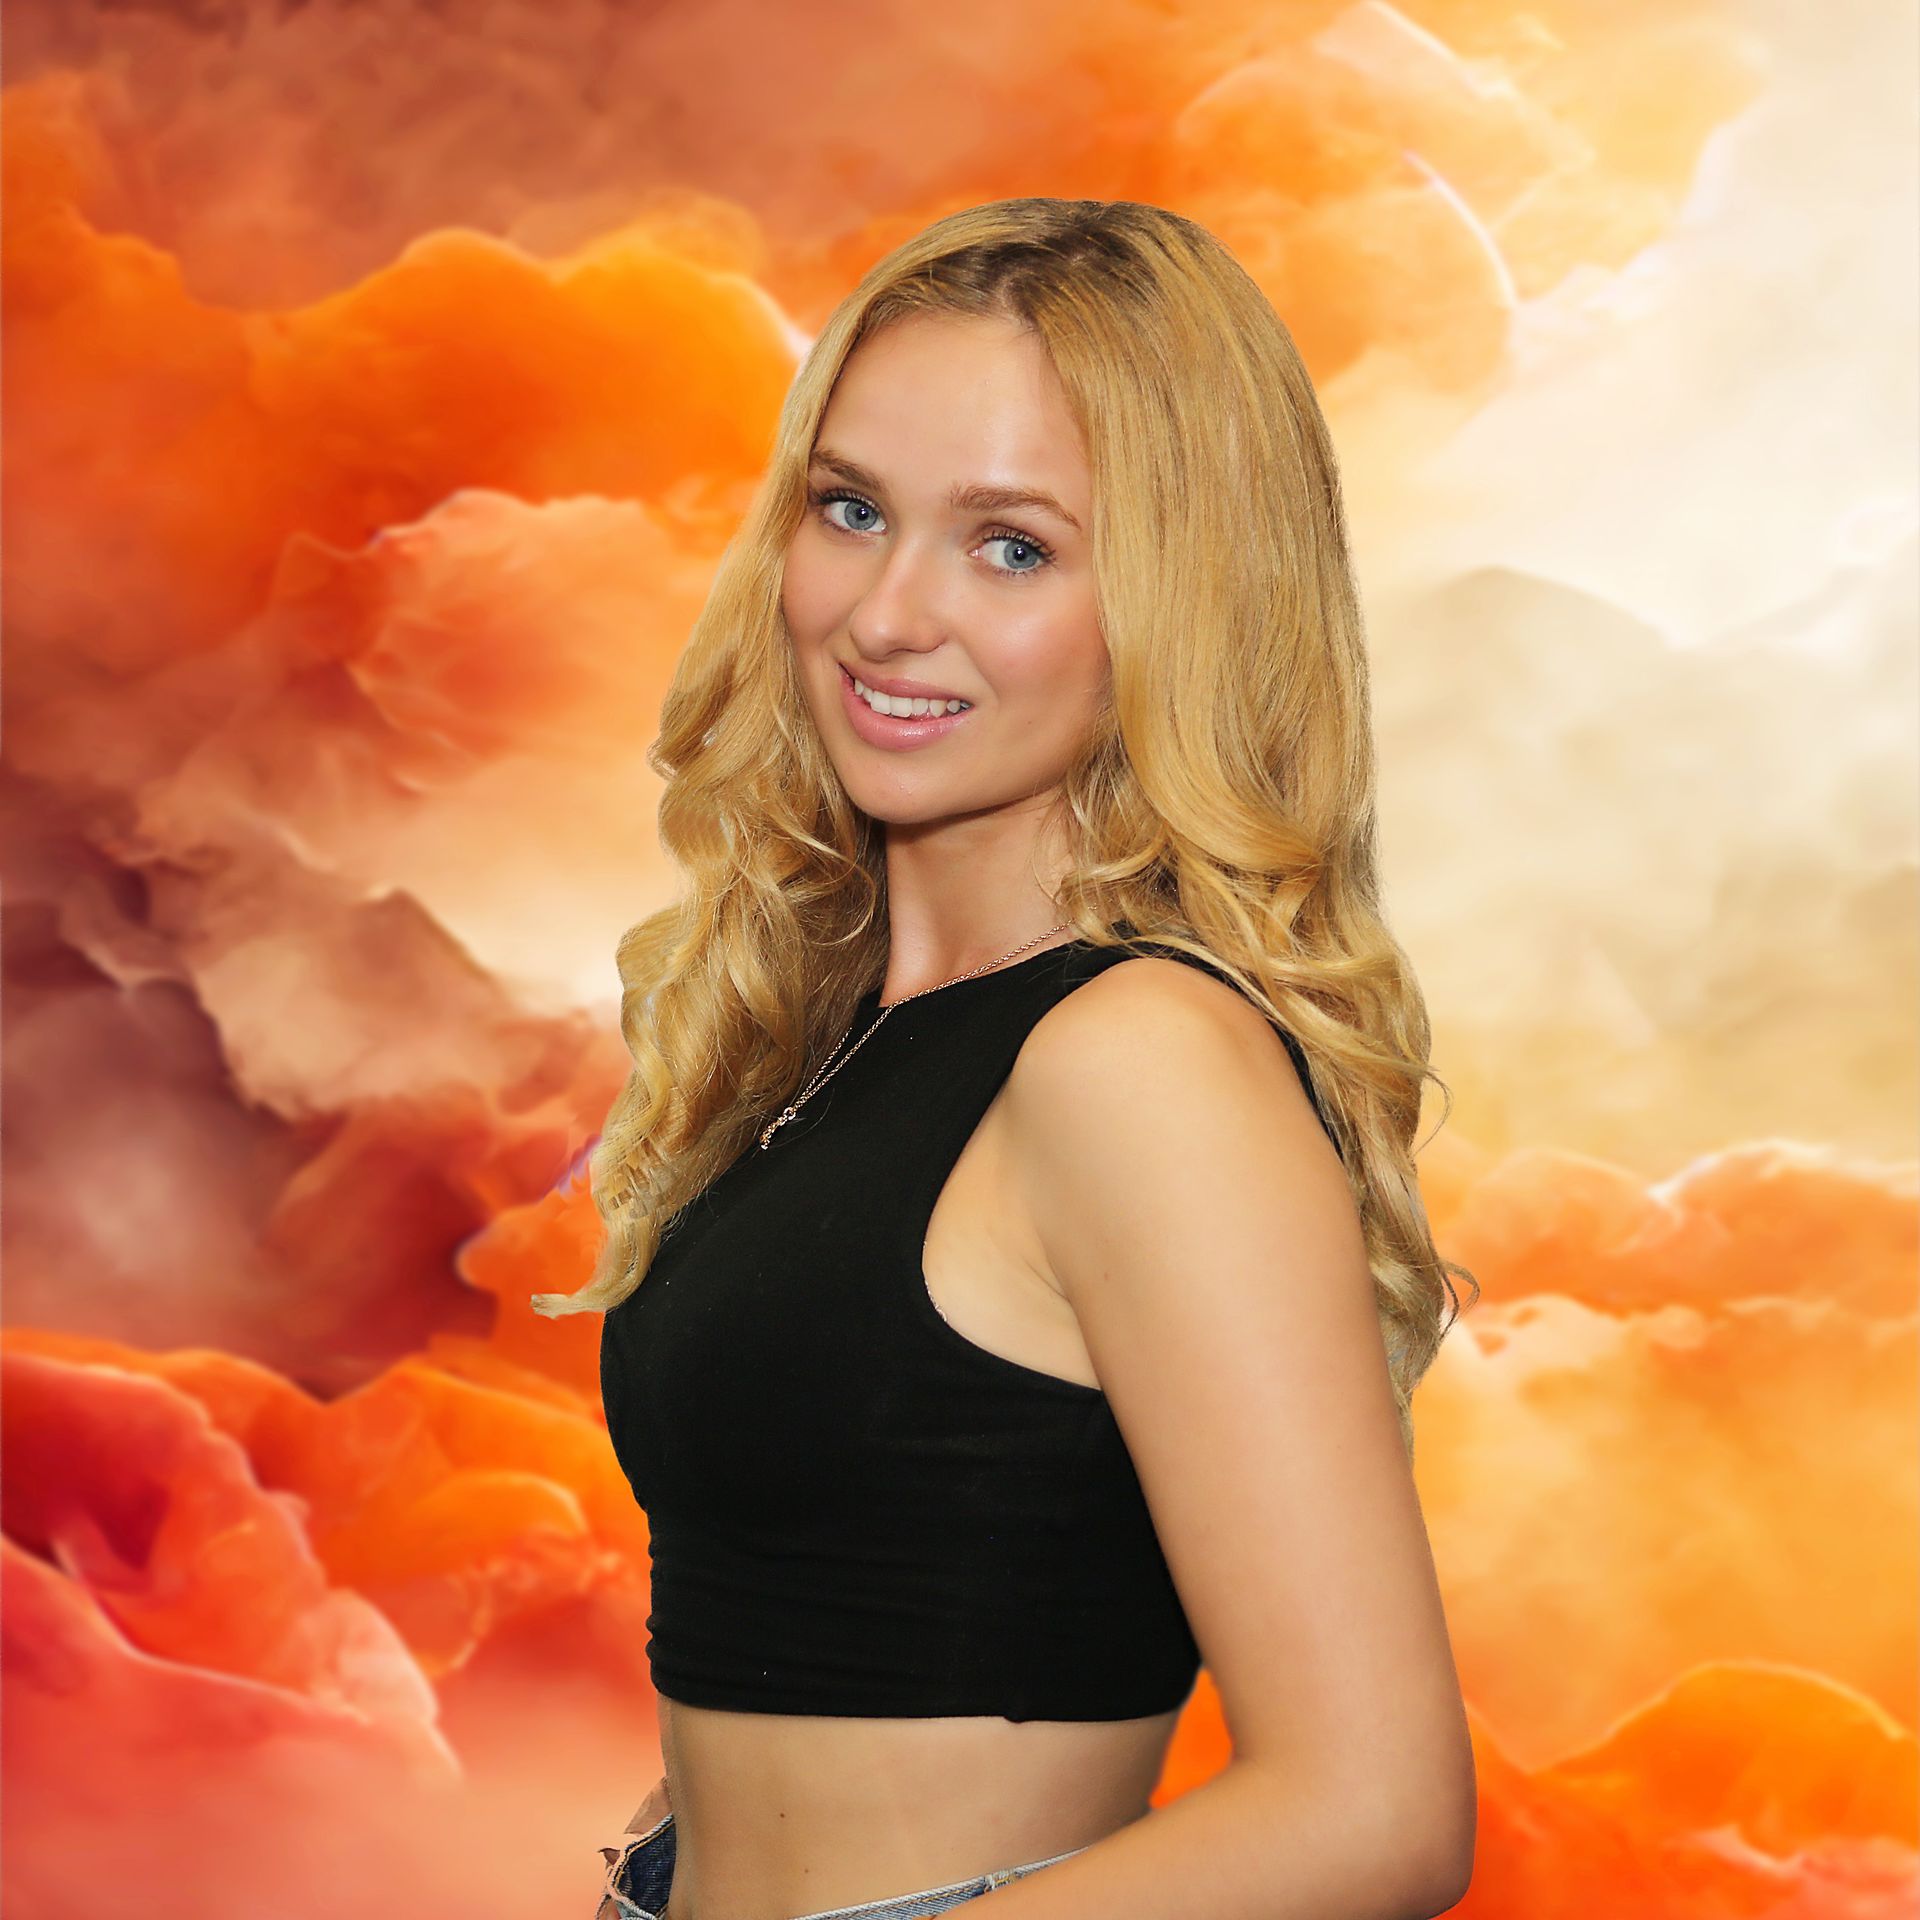 Glamorous model with fiery background